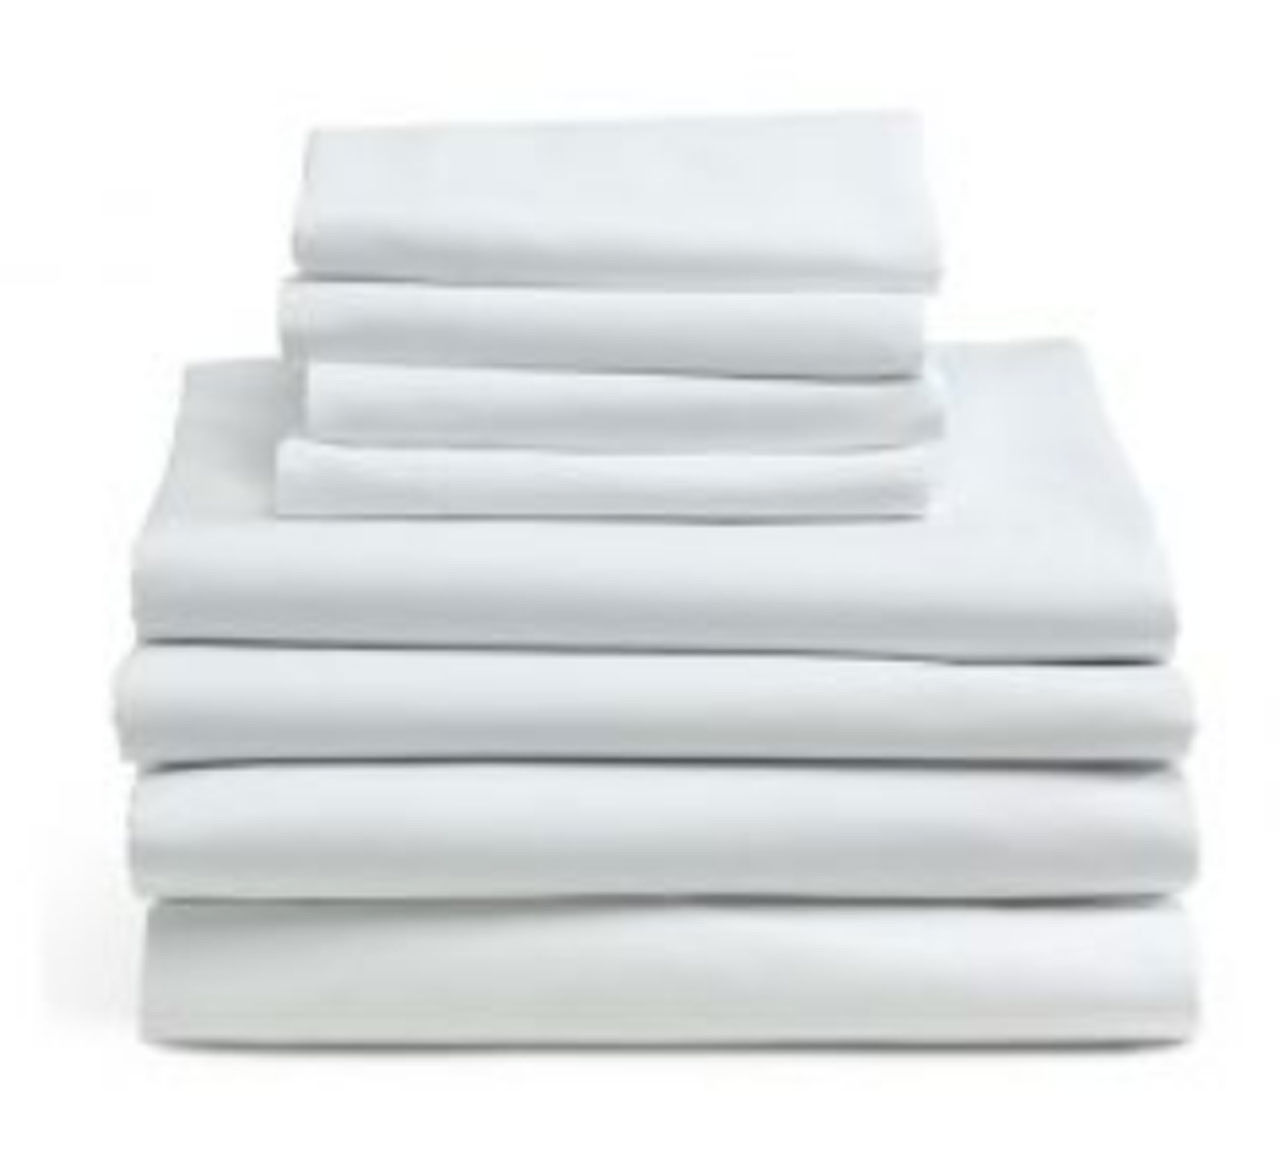 What is the color of the Royal Star T-180 Hospitality Bed Sheets from the Royal Star wholesale?